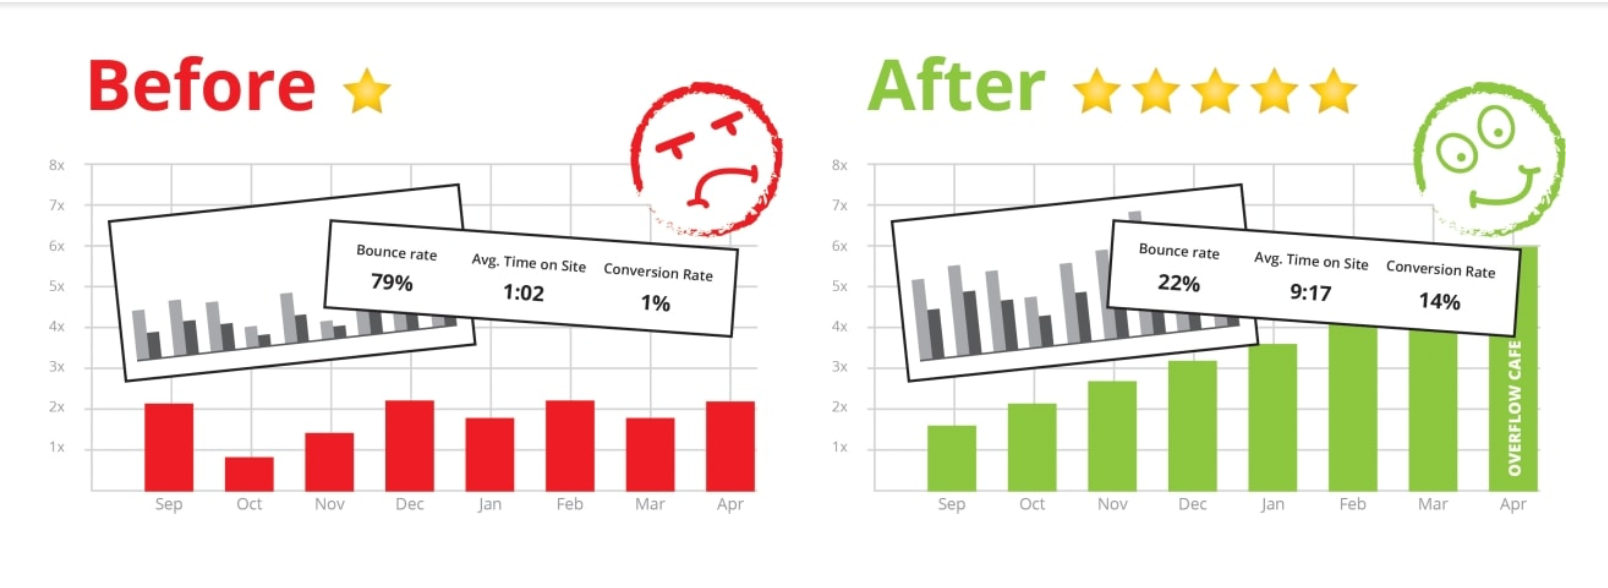 Overflow Cafe Review- Before and After Stats